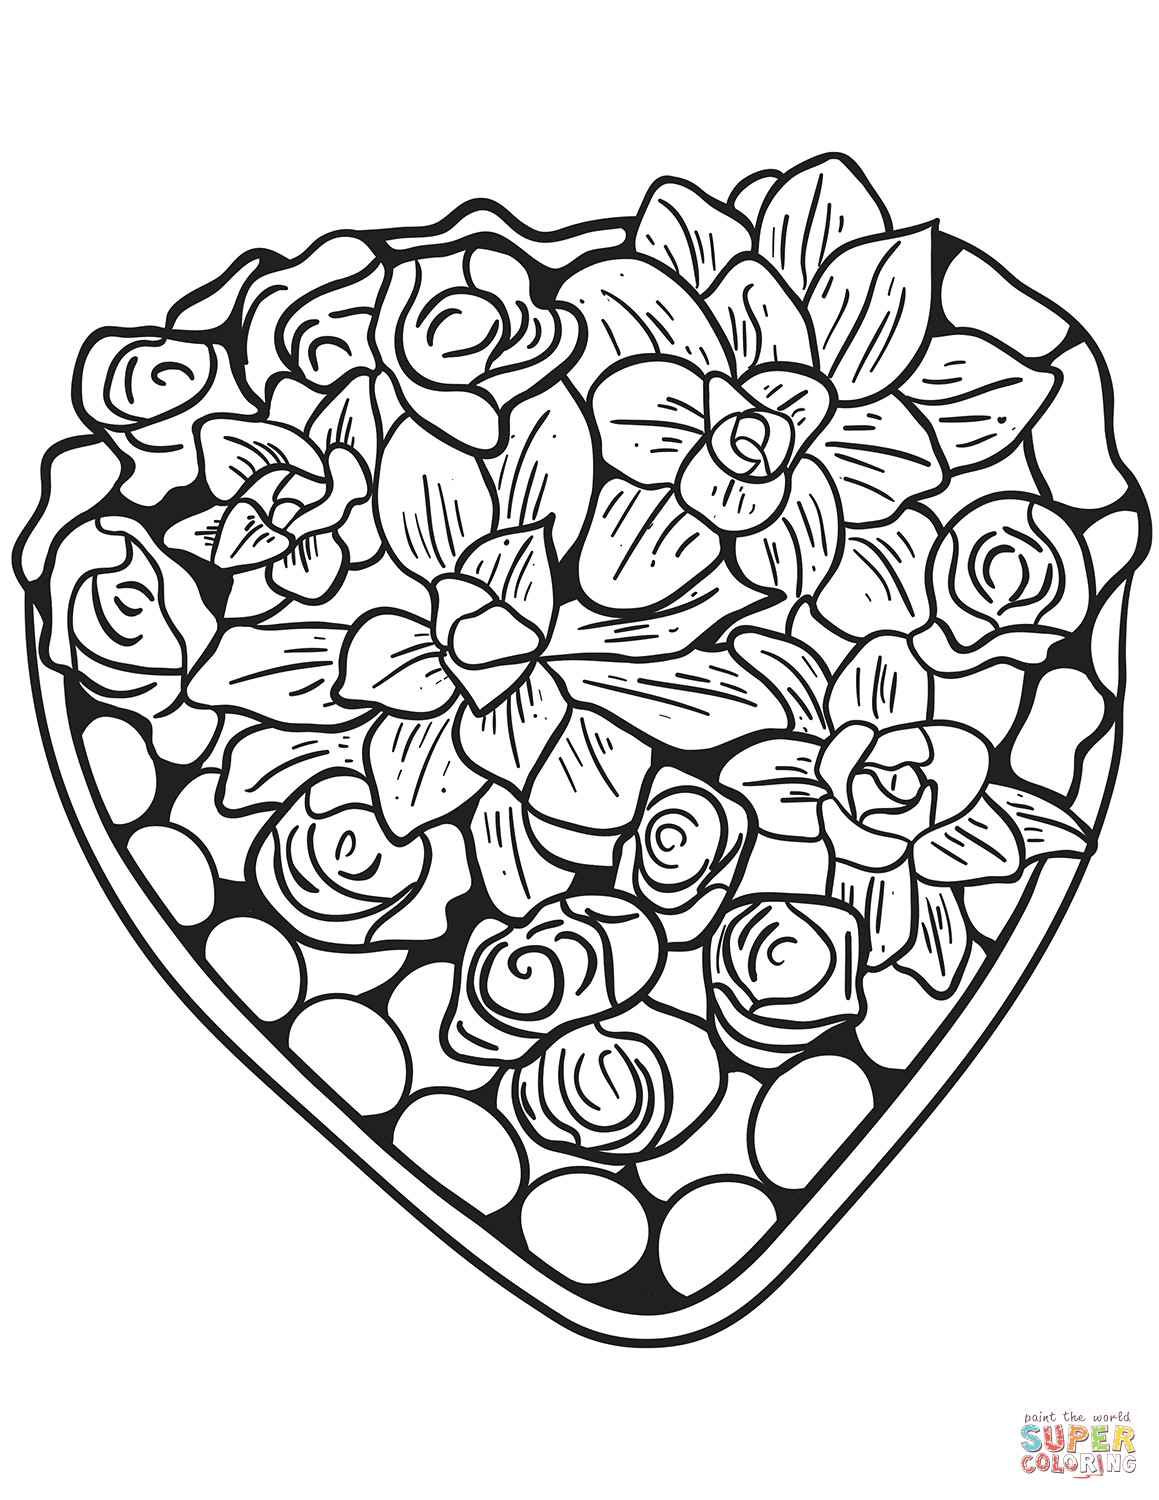 Free Printable Heart Coloring Pages
 Heart Made of Flowers coloring page